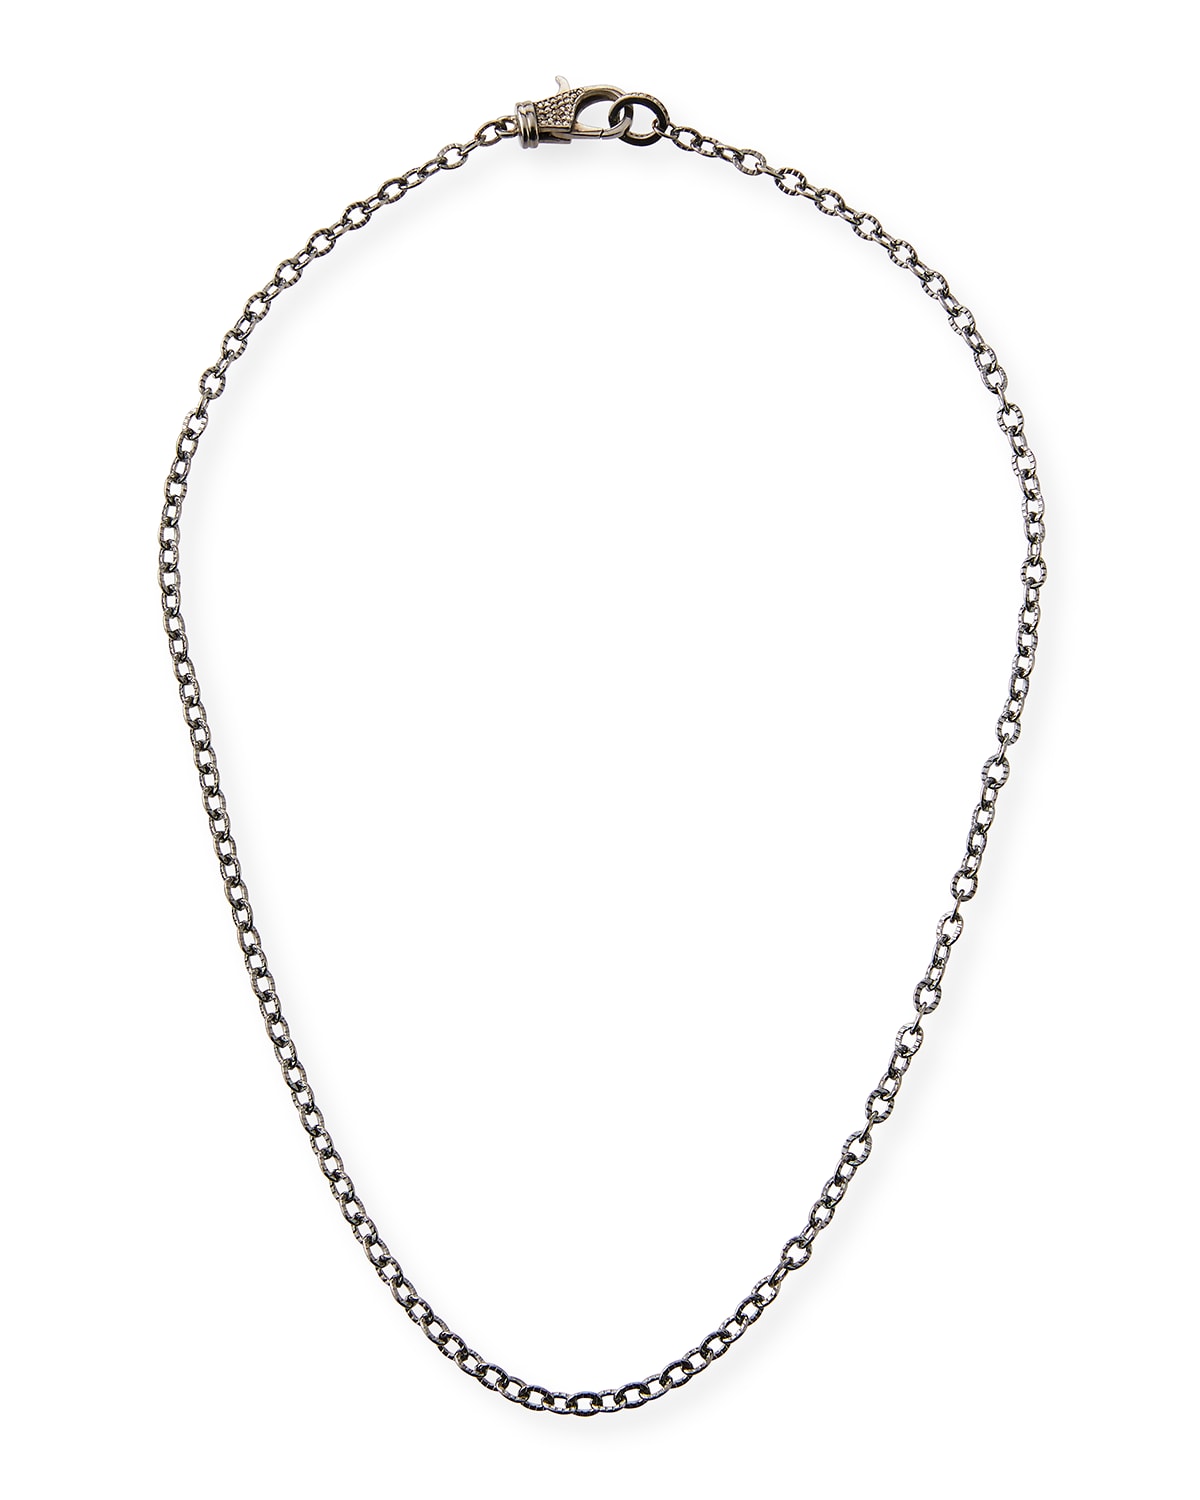 Margo Morrison Rhodium-plated Sterling Silver Chain Necklace With Diamond Clasp, 18"